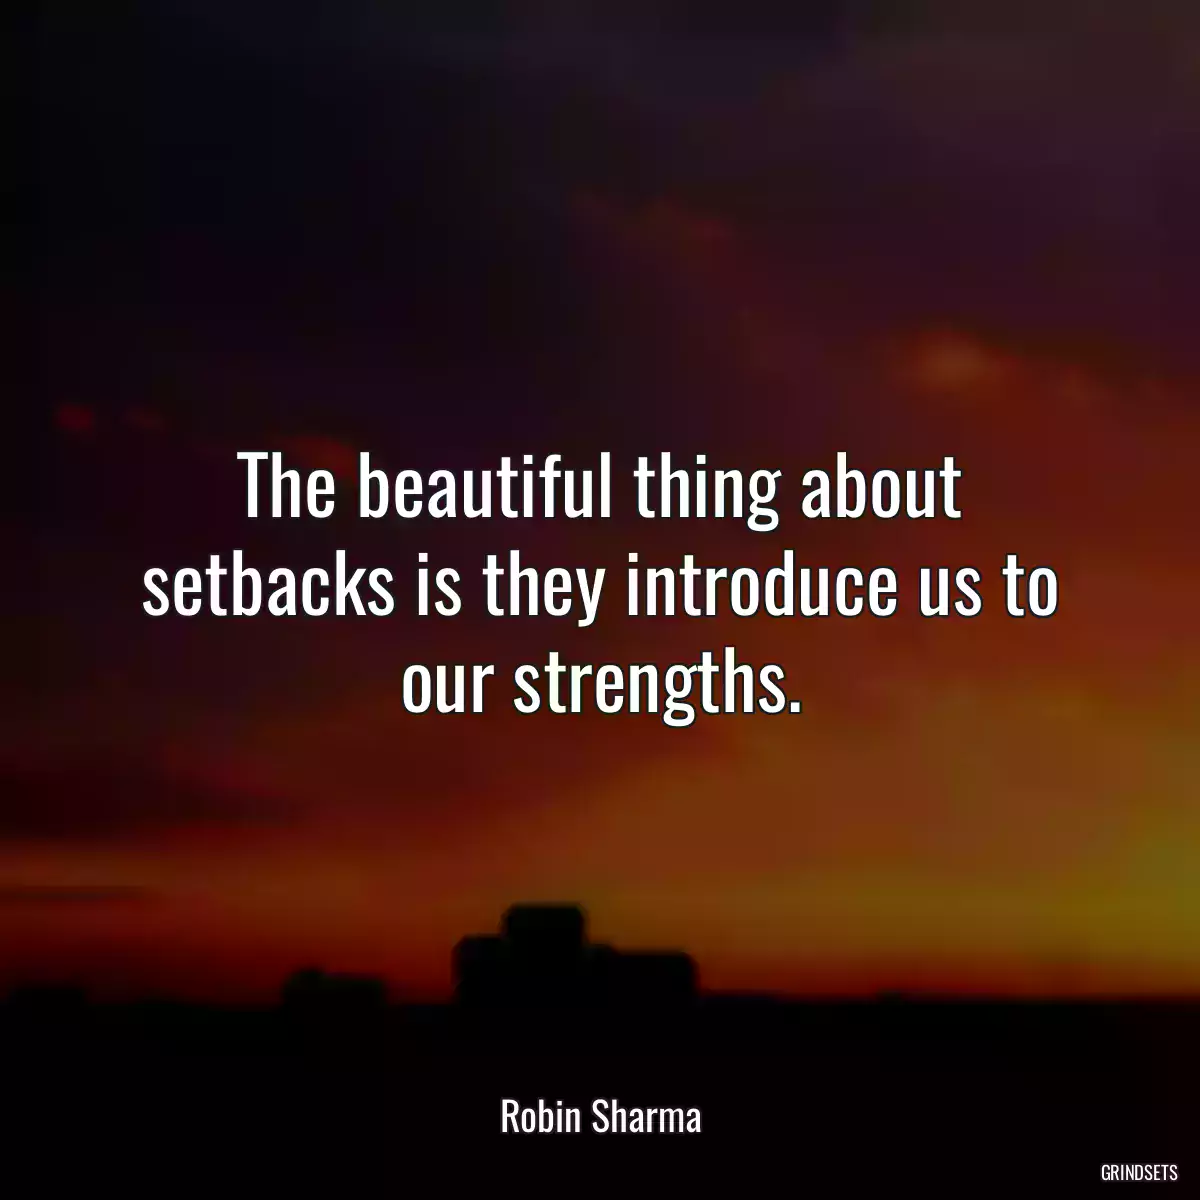 The beautiful thing about setbacks is they introduce us to our strengths.